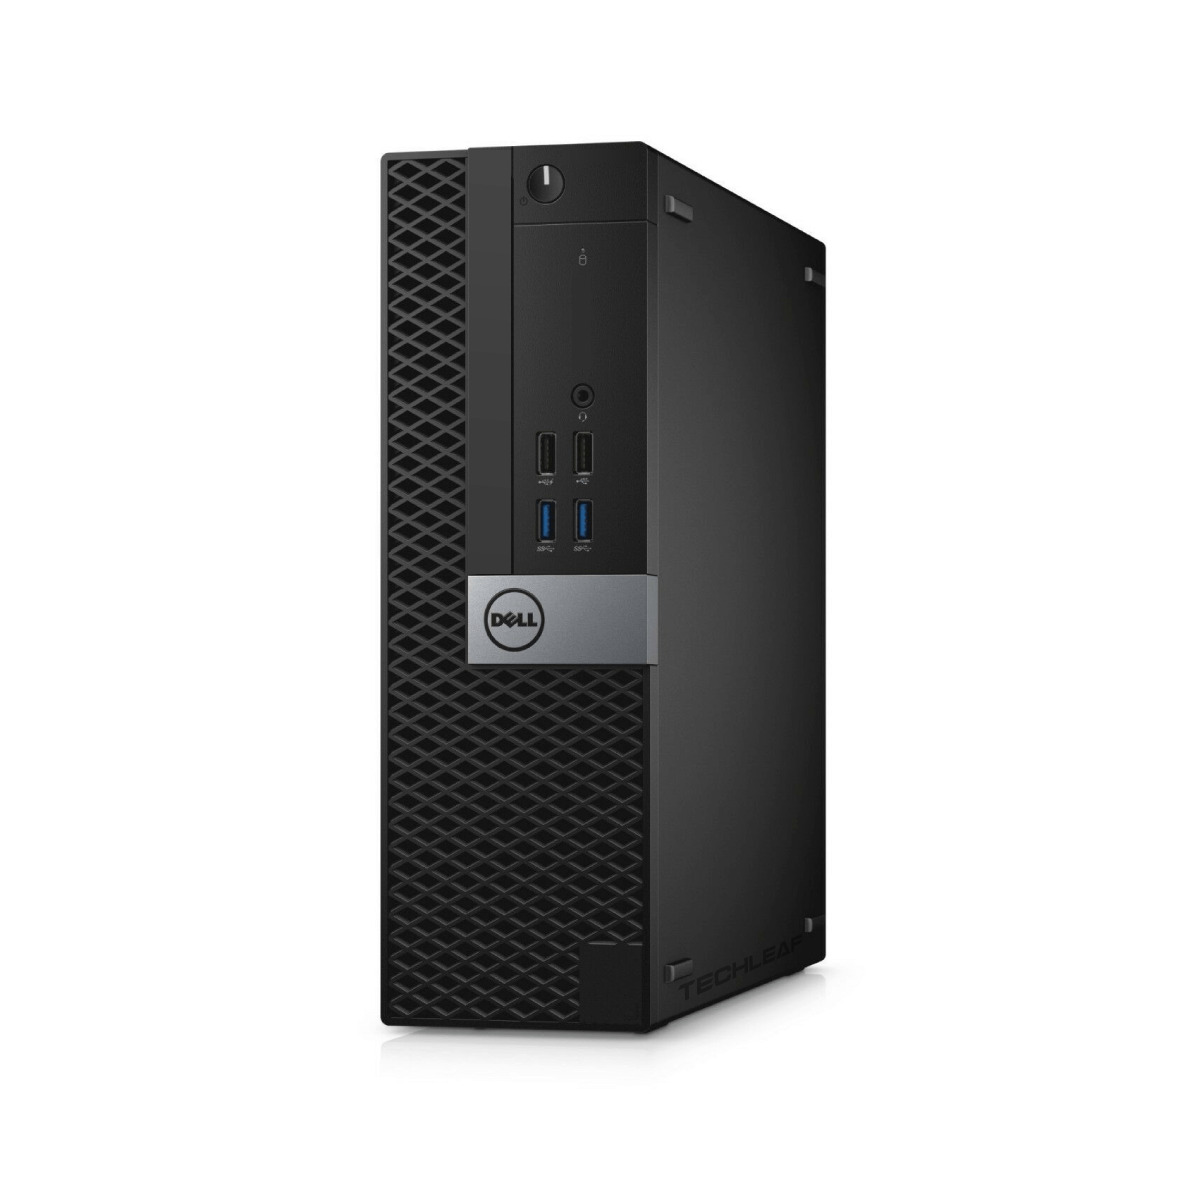 Dell i5 Desktop Computer PC | up to 16GB RAM, 4TB SSD, 22